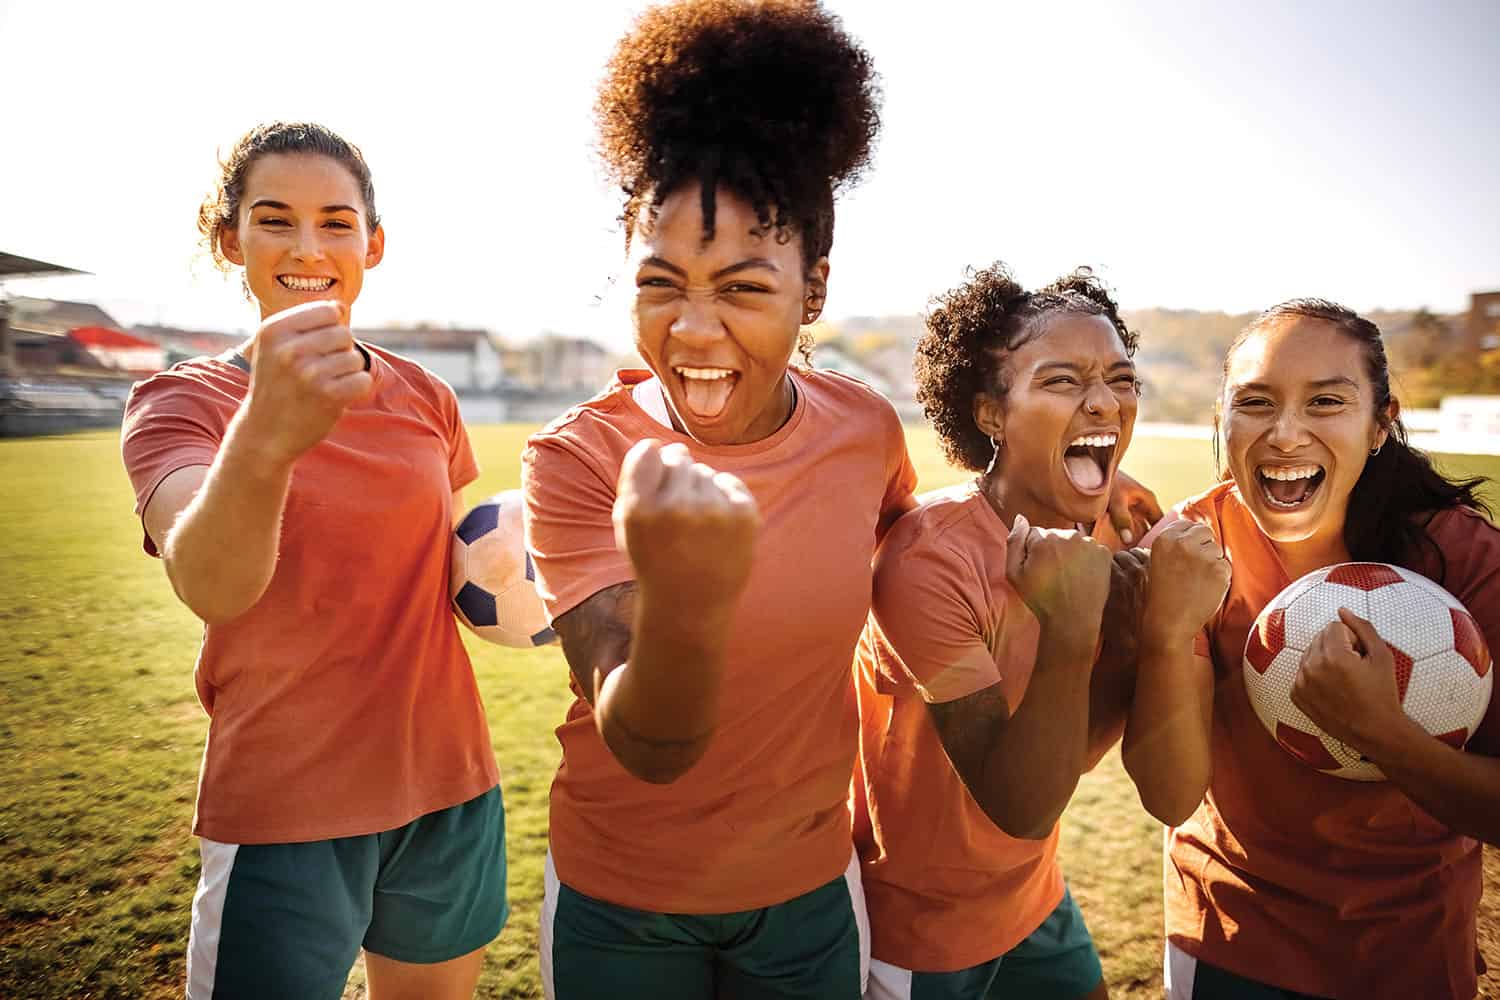 photo of four jubilant women footballers, smiling with fists raised, football pitch and stand in background